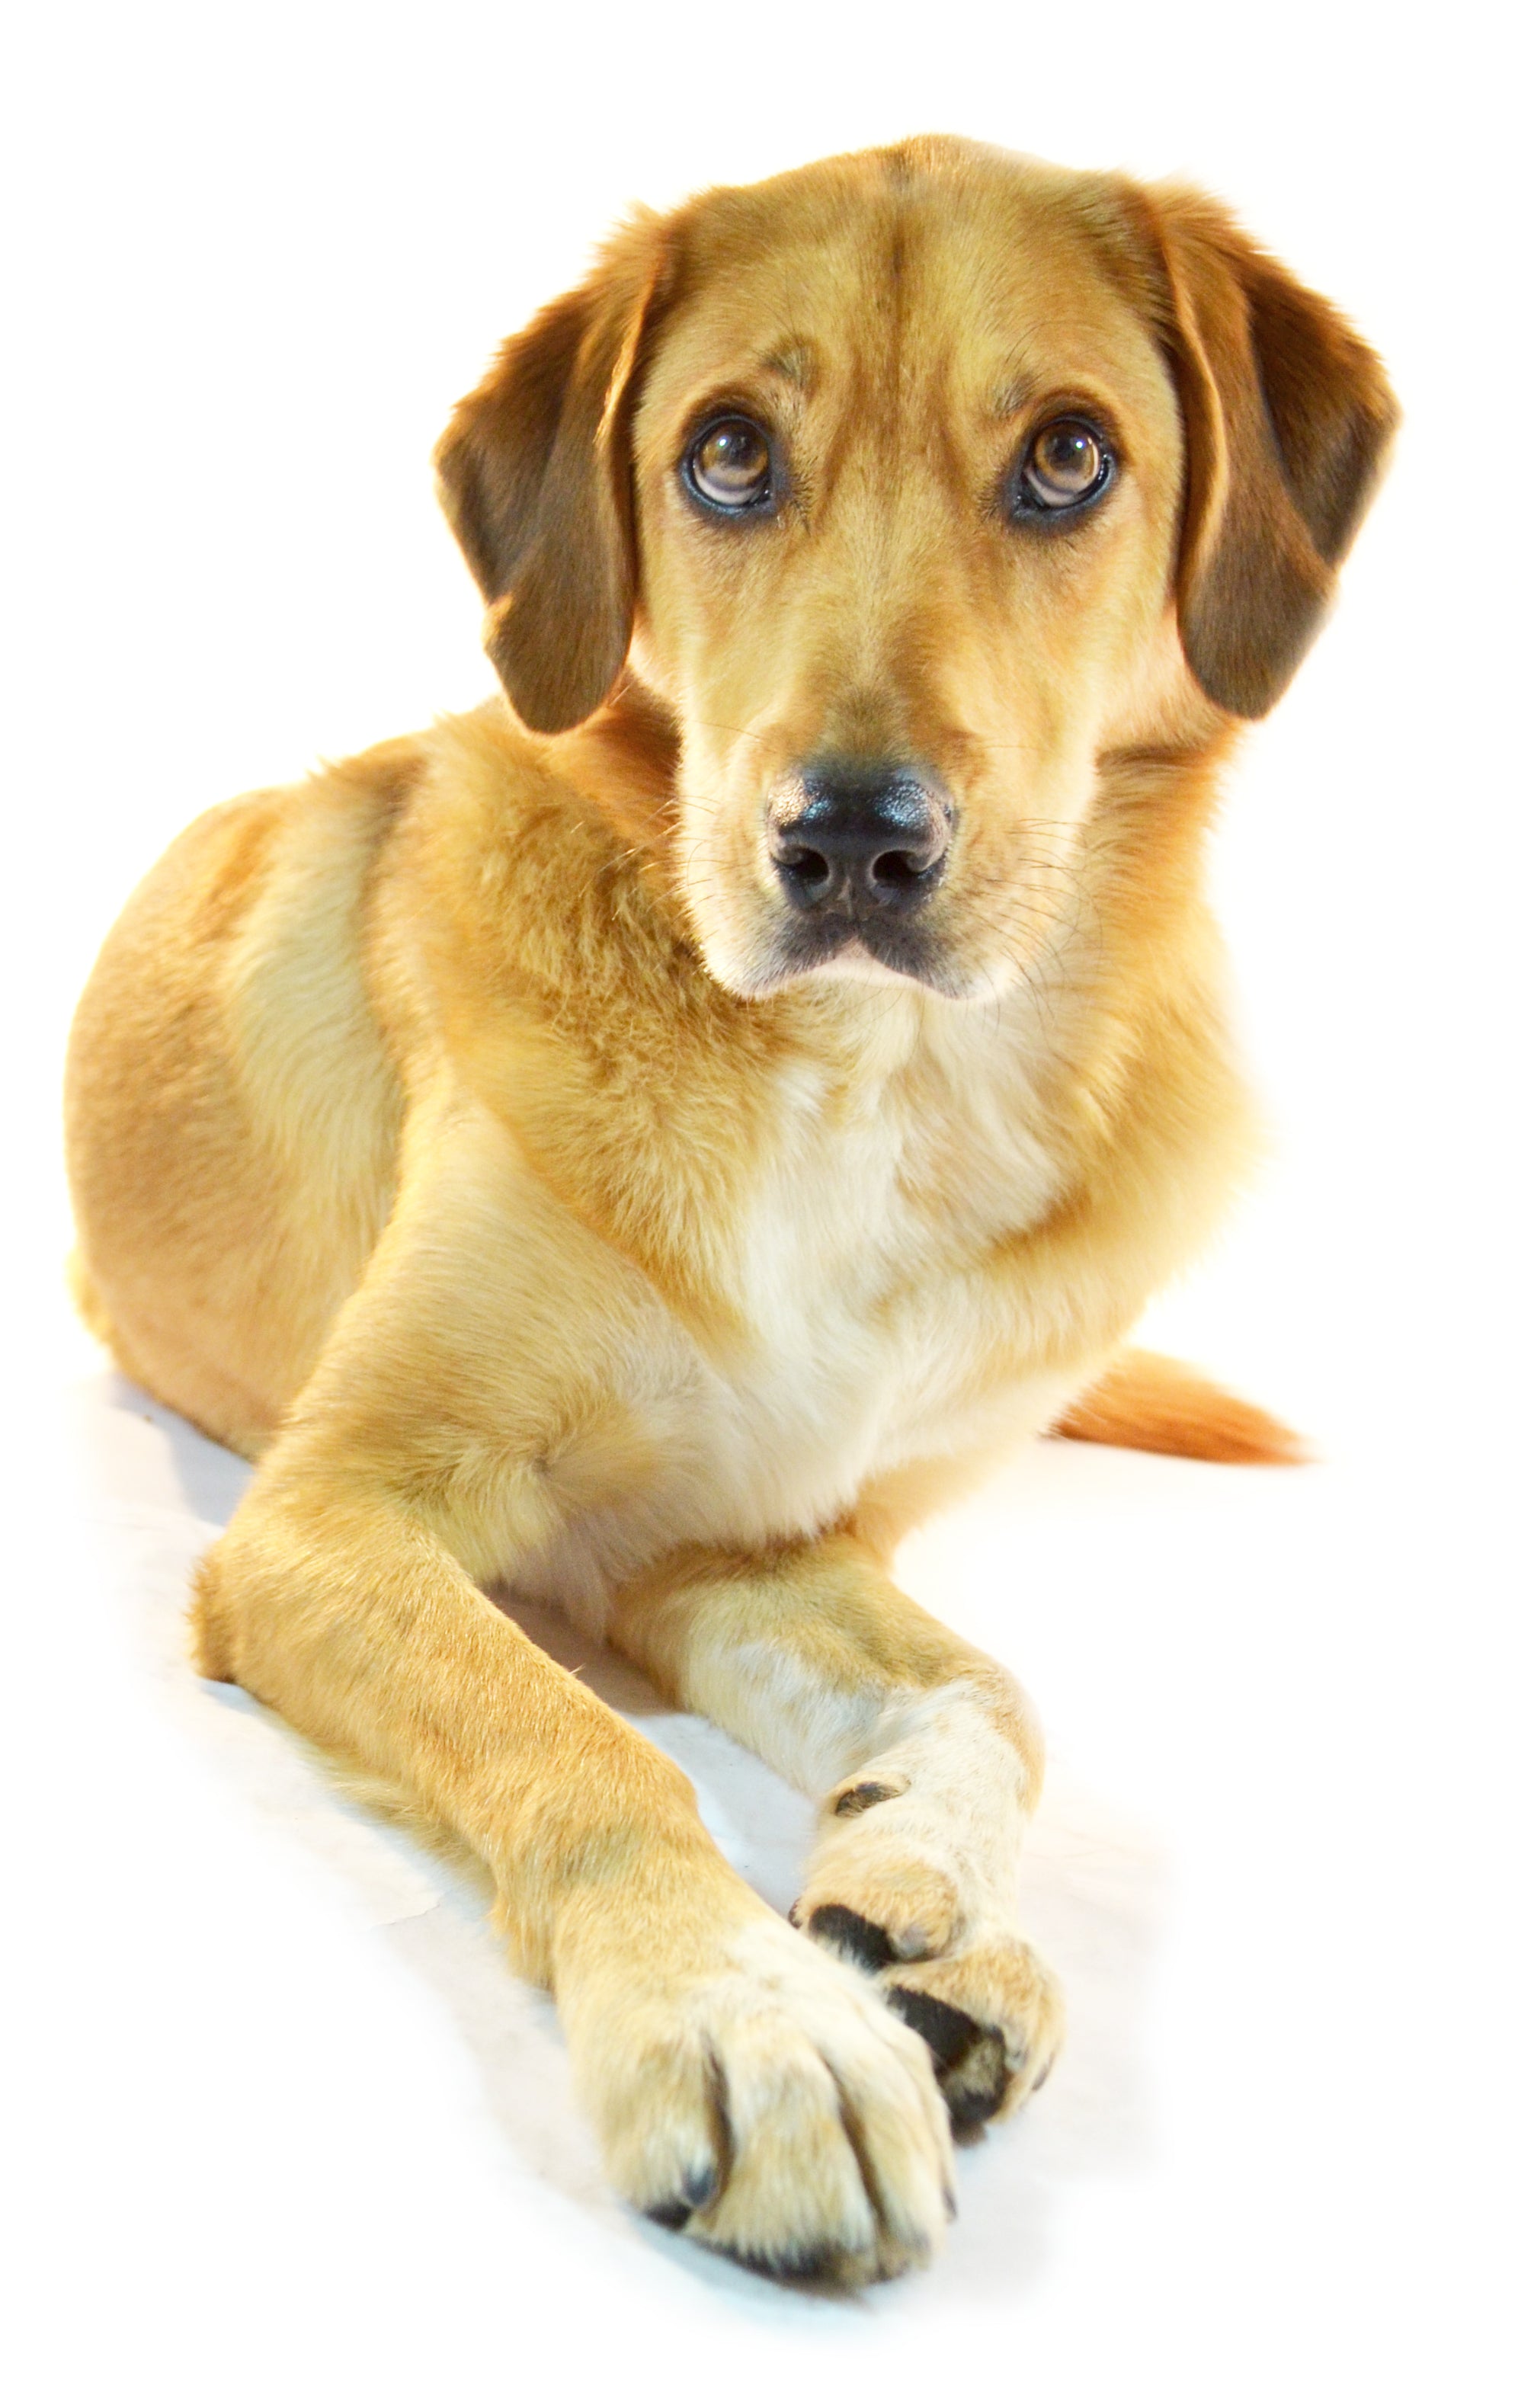 A mix-breed dog with yellow fur sitting down against a white background and looking directly into the camera.